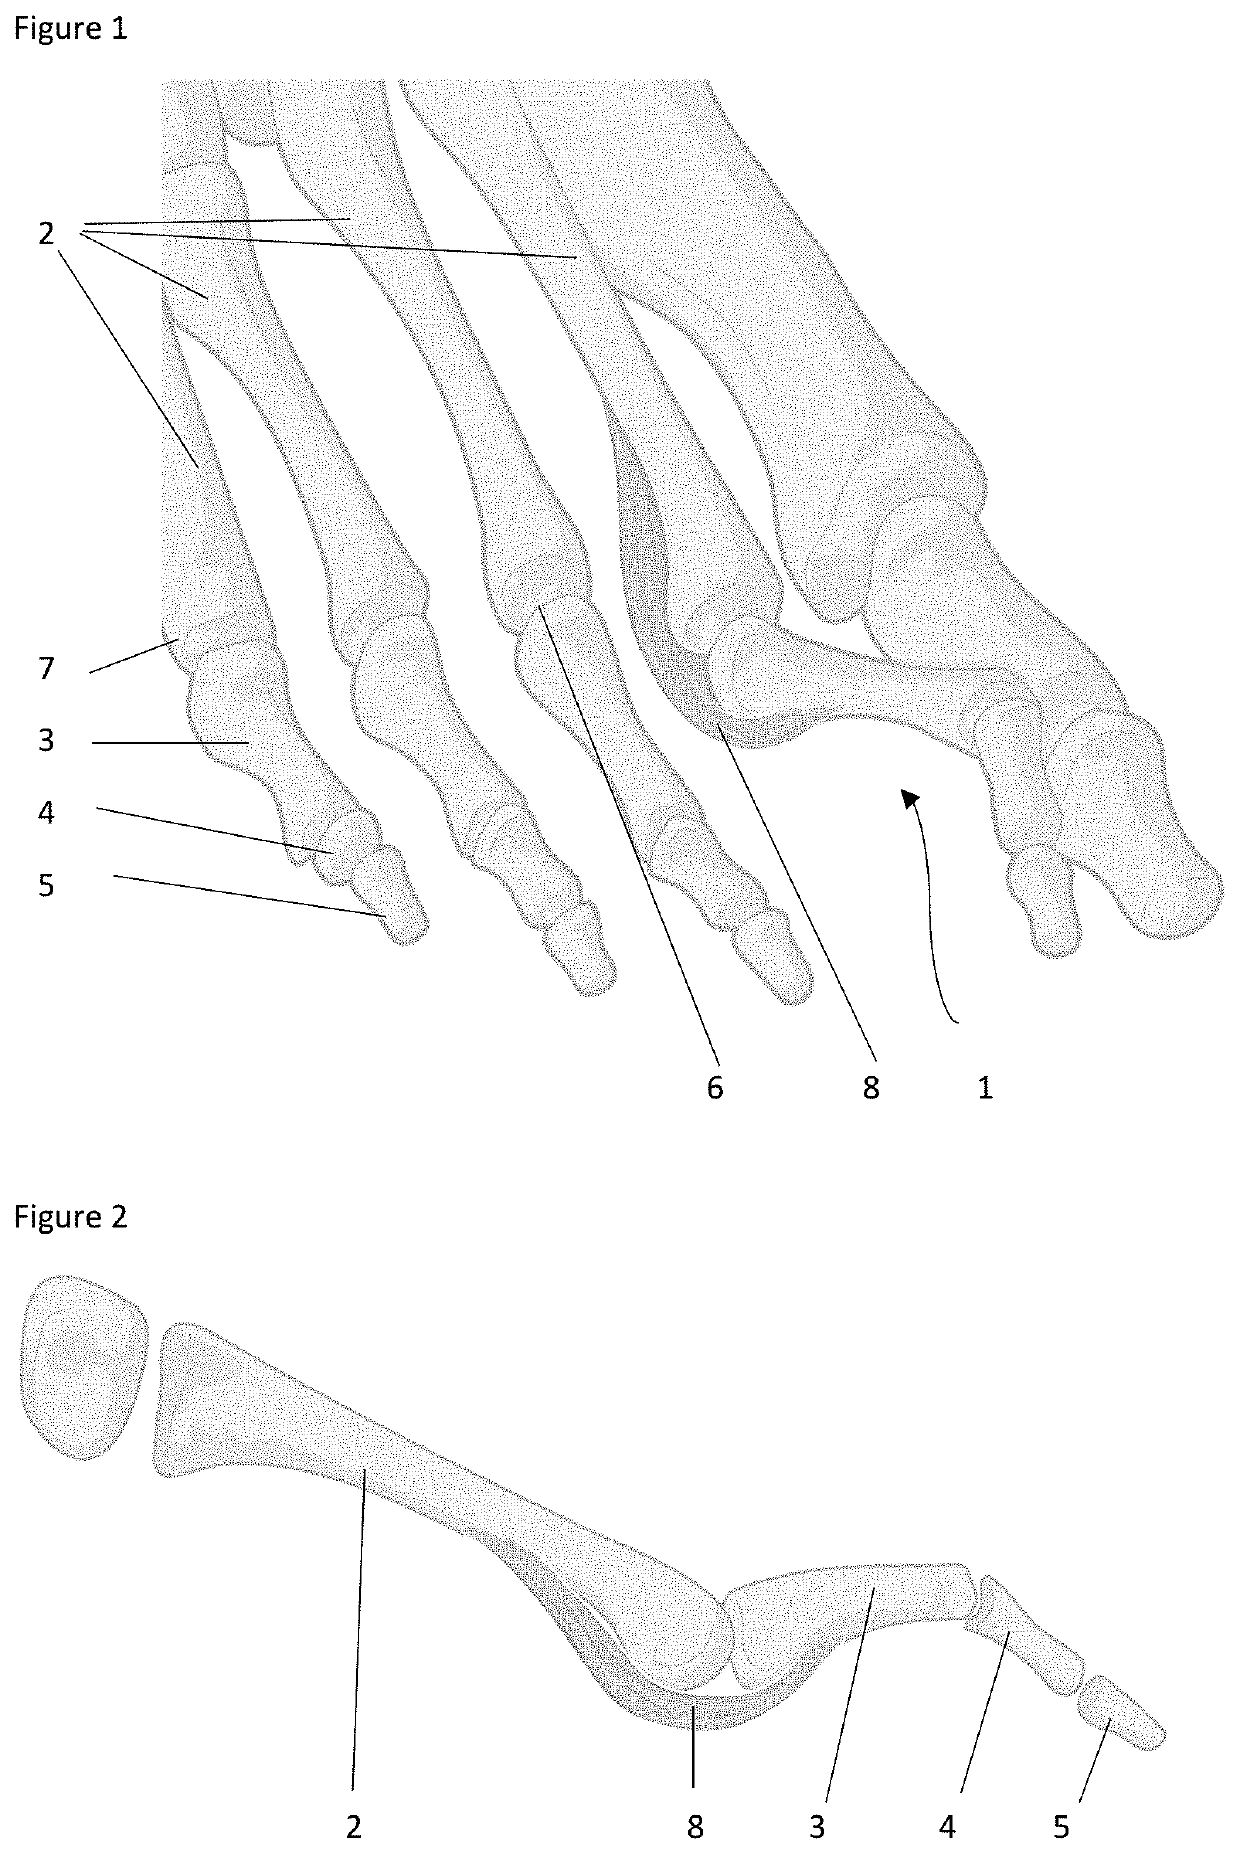 Surgical methods for the treatment of plantar plate injury